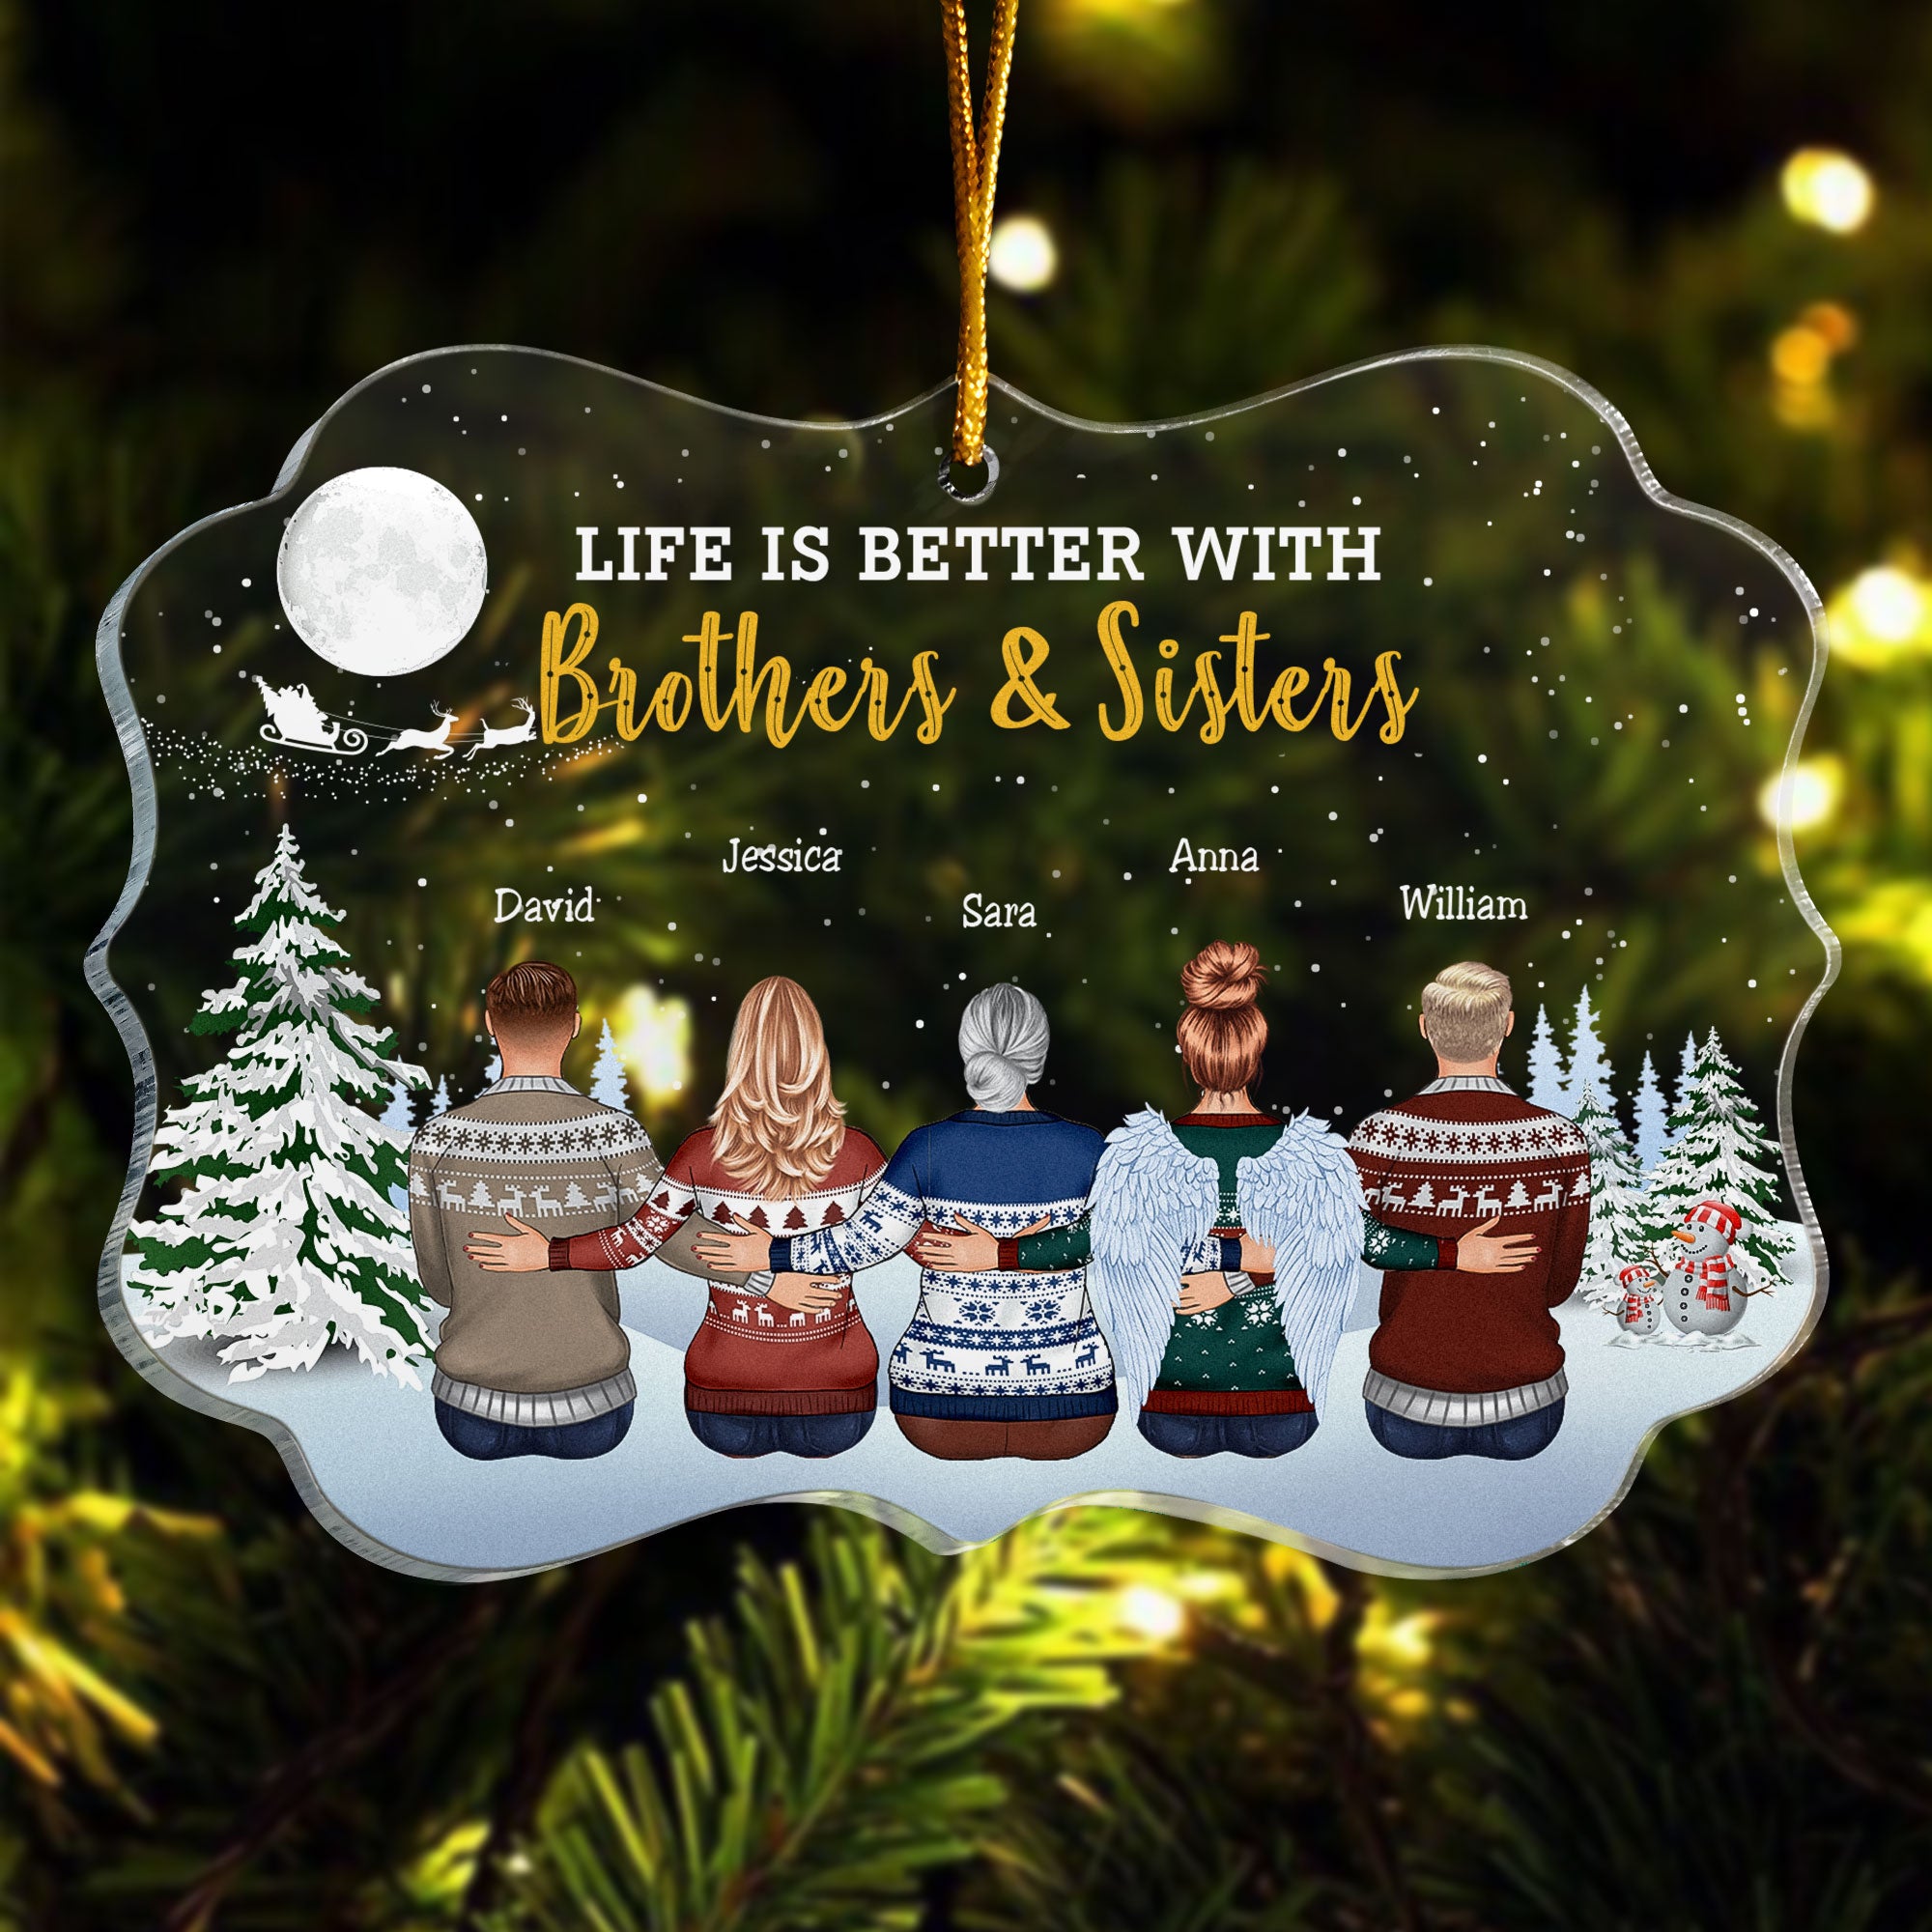 The Greatest Gift Our Parents Gave Us Was Each Other - Personalized Acrylic Ornament - Christmas Gift For Family Members, Brothers, Sisters - Up To 20 People  LIFE IS BETTER WITH B X W1111am 